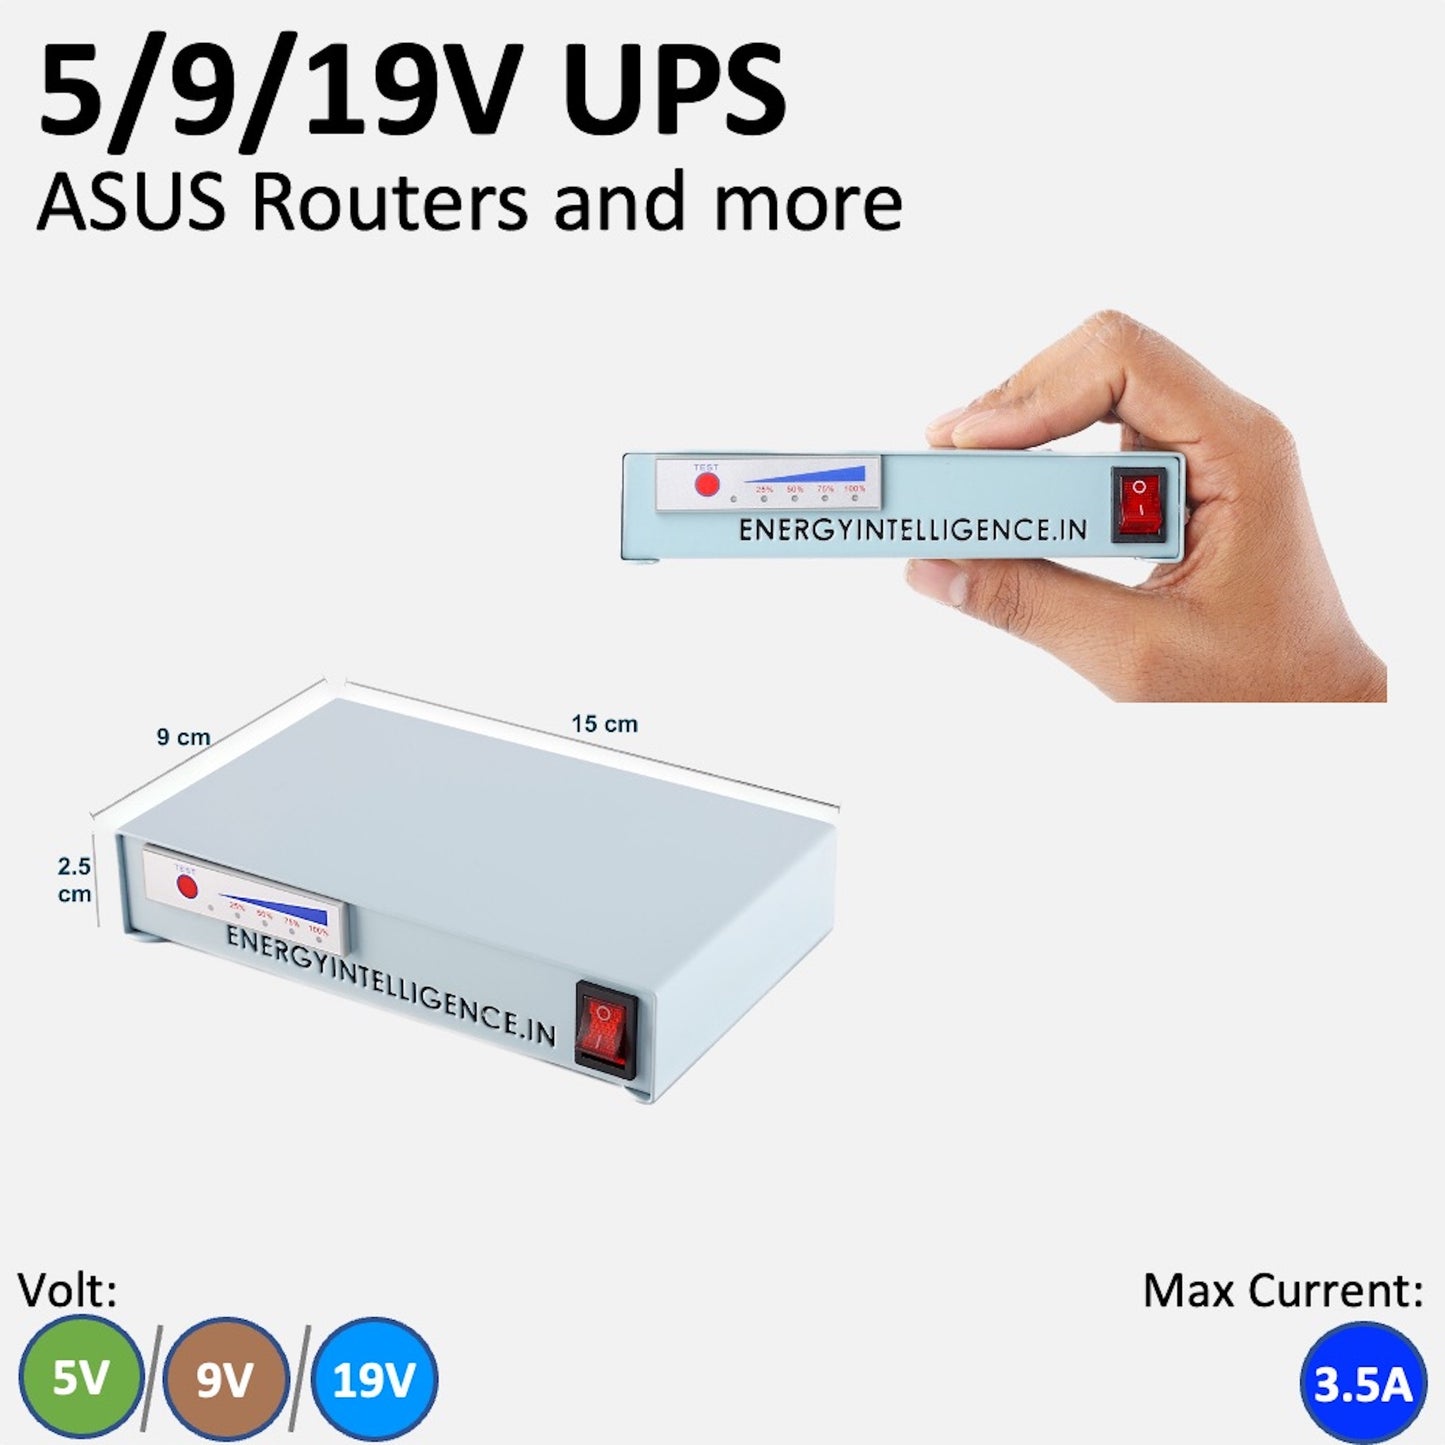 Voltage customizable UPS for special routers like Nest, ASUS - Configurable for 19V, 9V, 5V. 19V for ASUS  19V routers